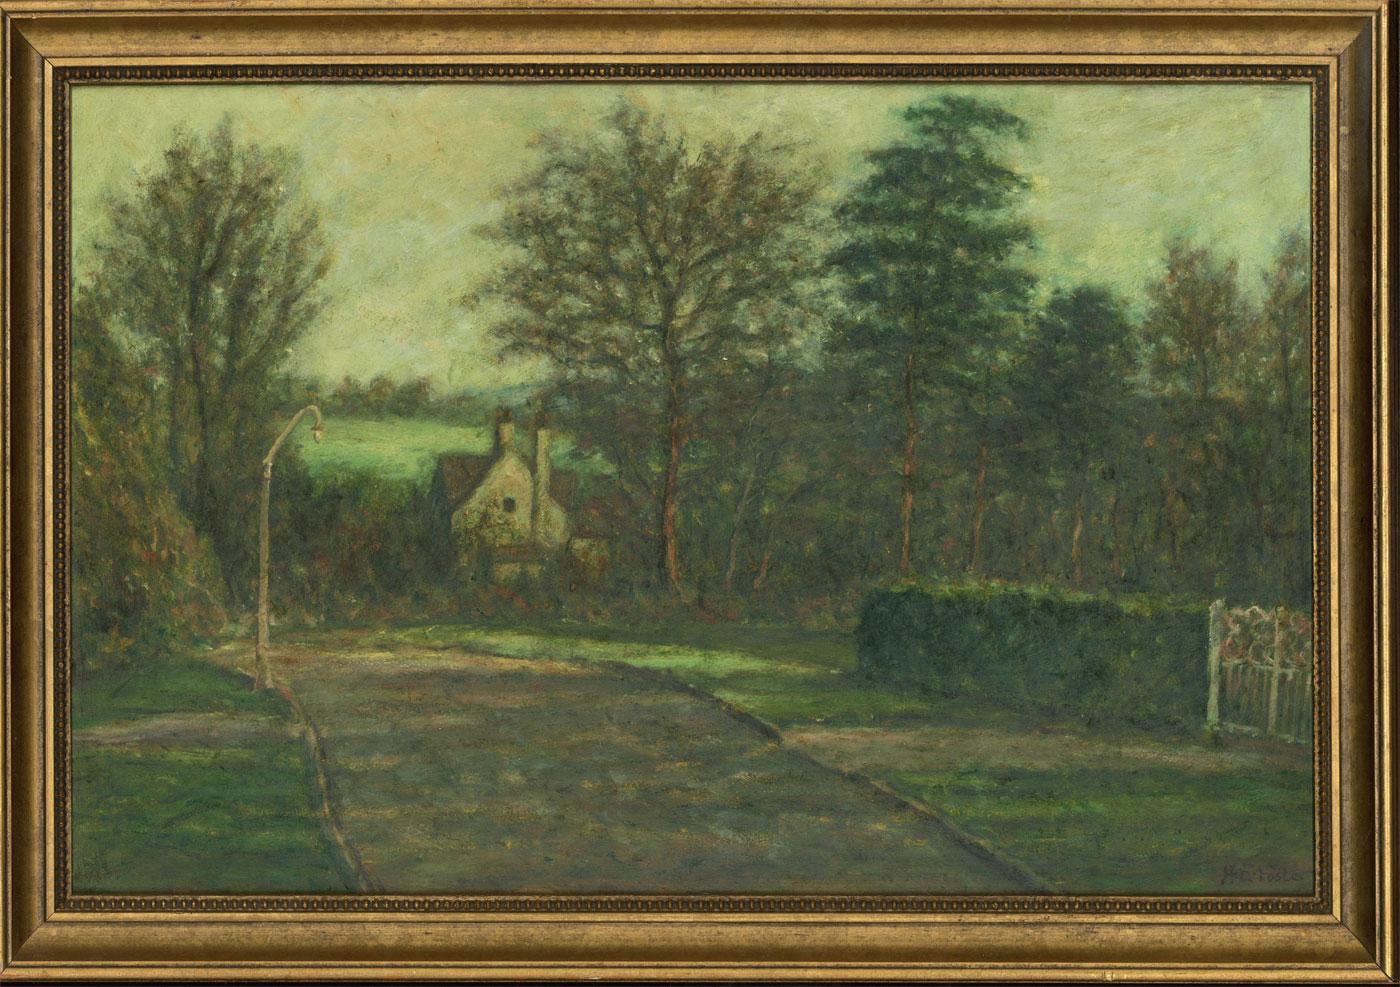 Unknown Landscape Painting - Henry E. Foster (1921-2010) - Signed & Framed 1974 Oil, Forgemill Cottage